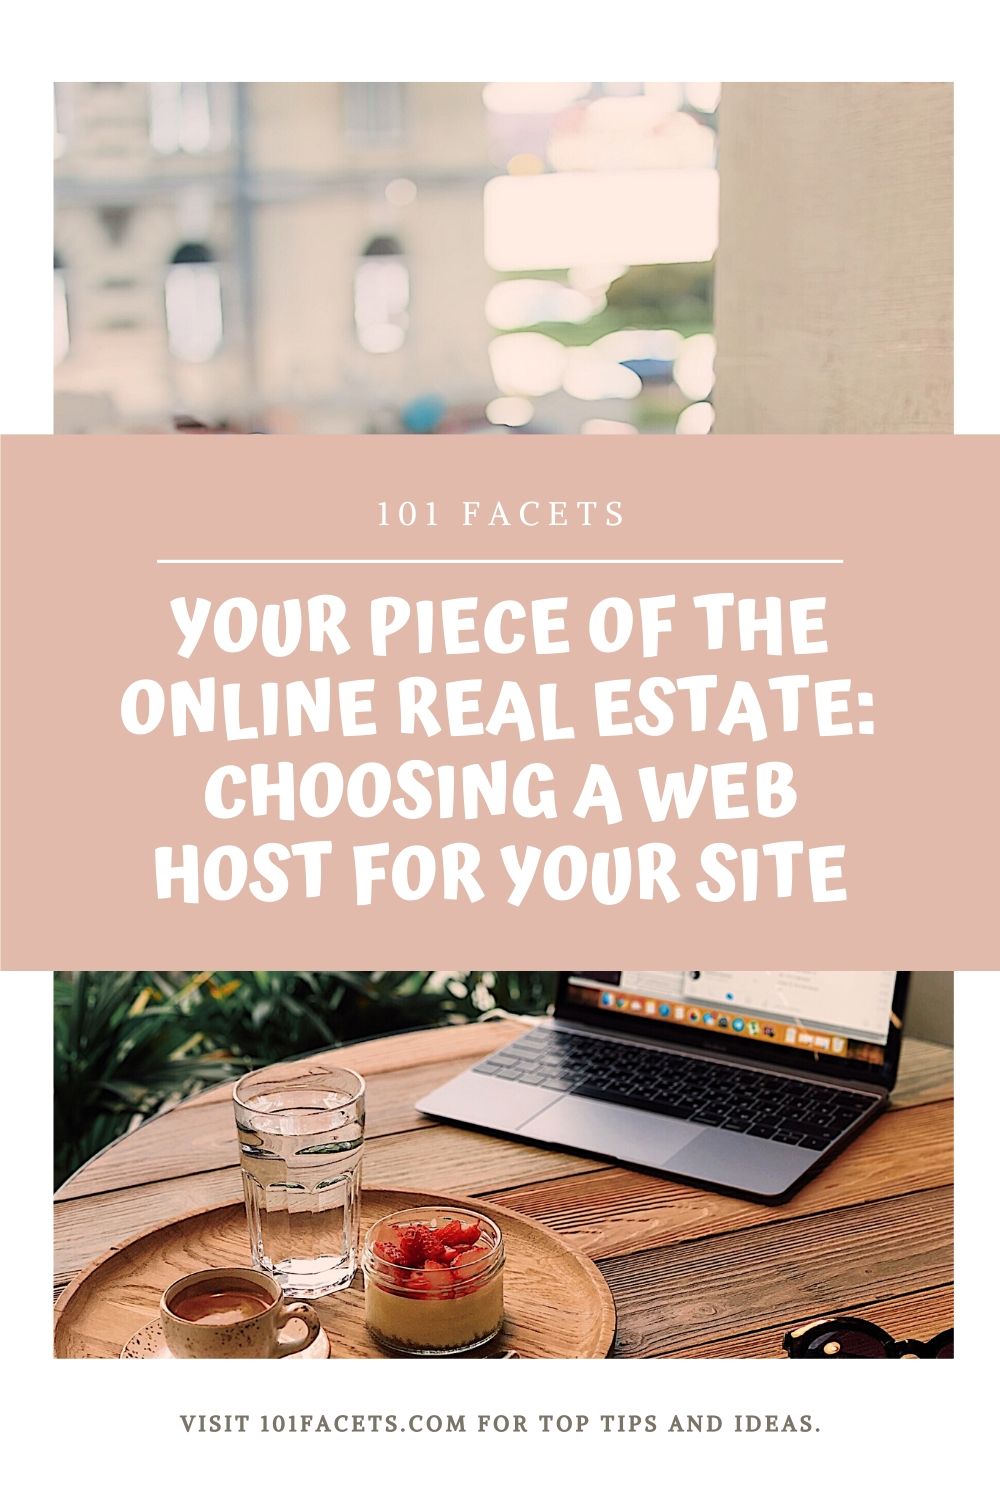 Your Piece of the Online Real Estate: Choosing a Web Host for Your Site